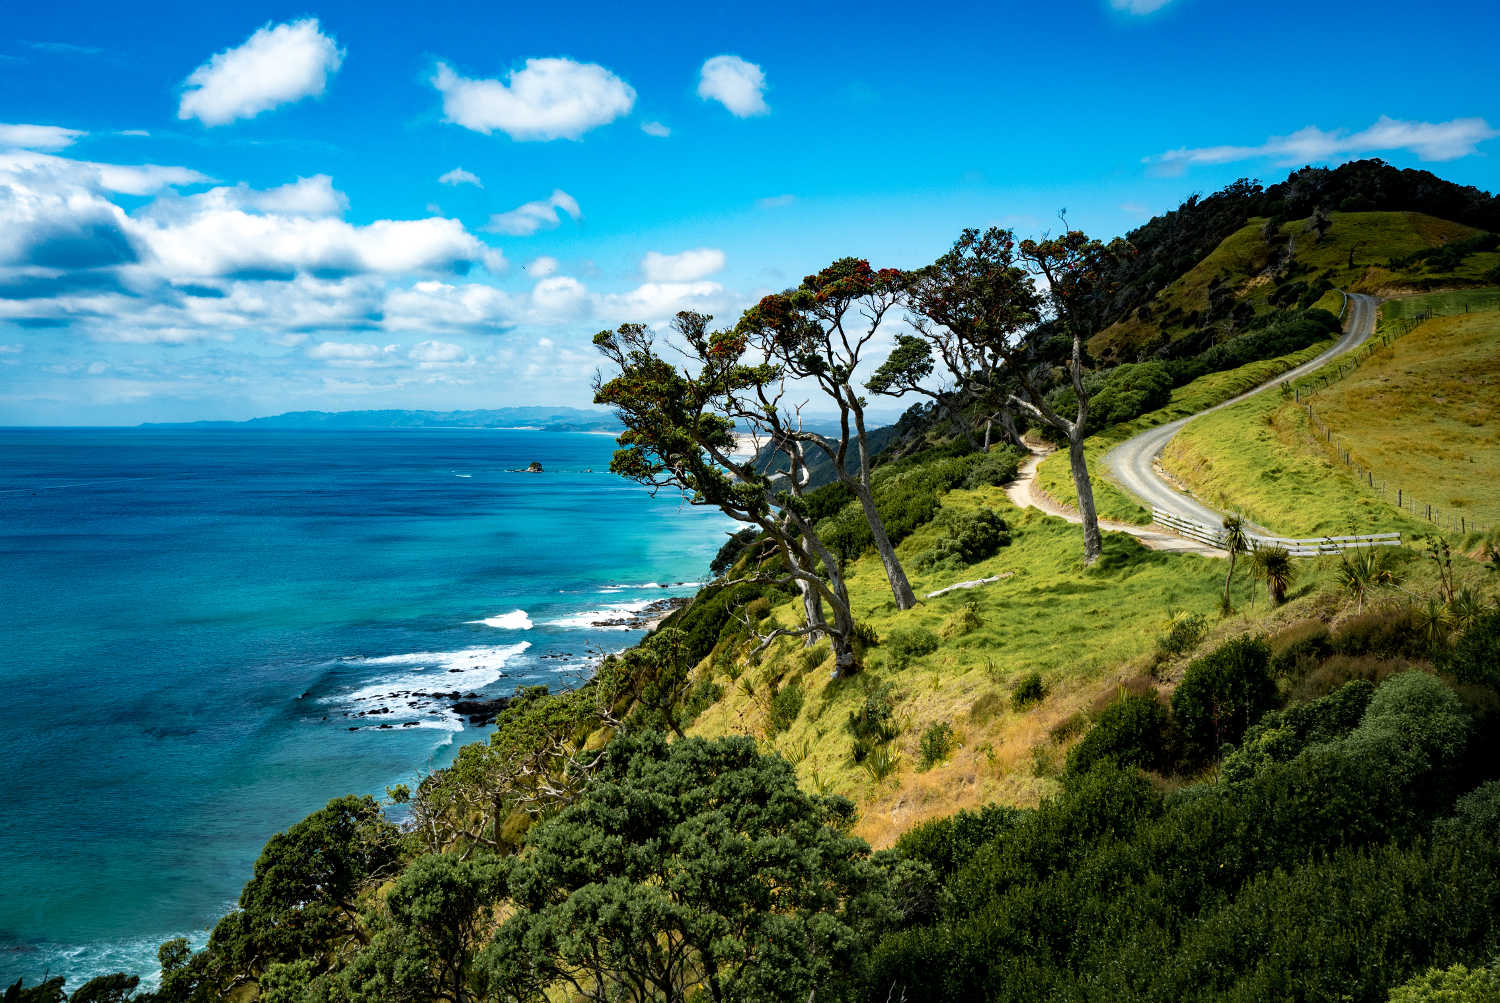 A view along the coastline of the Pacific Ocean from the famouse Mangawhai Heads walk in Northland, New Zealand